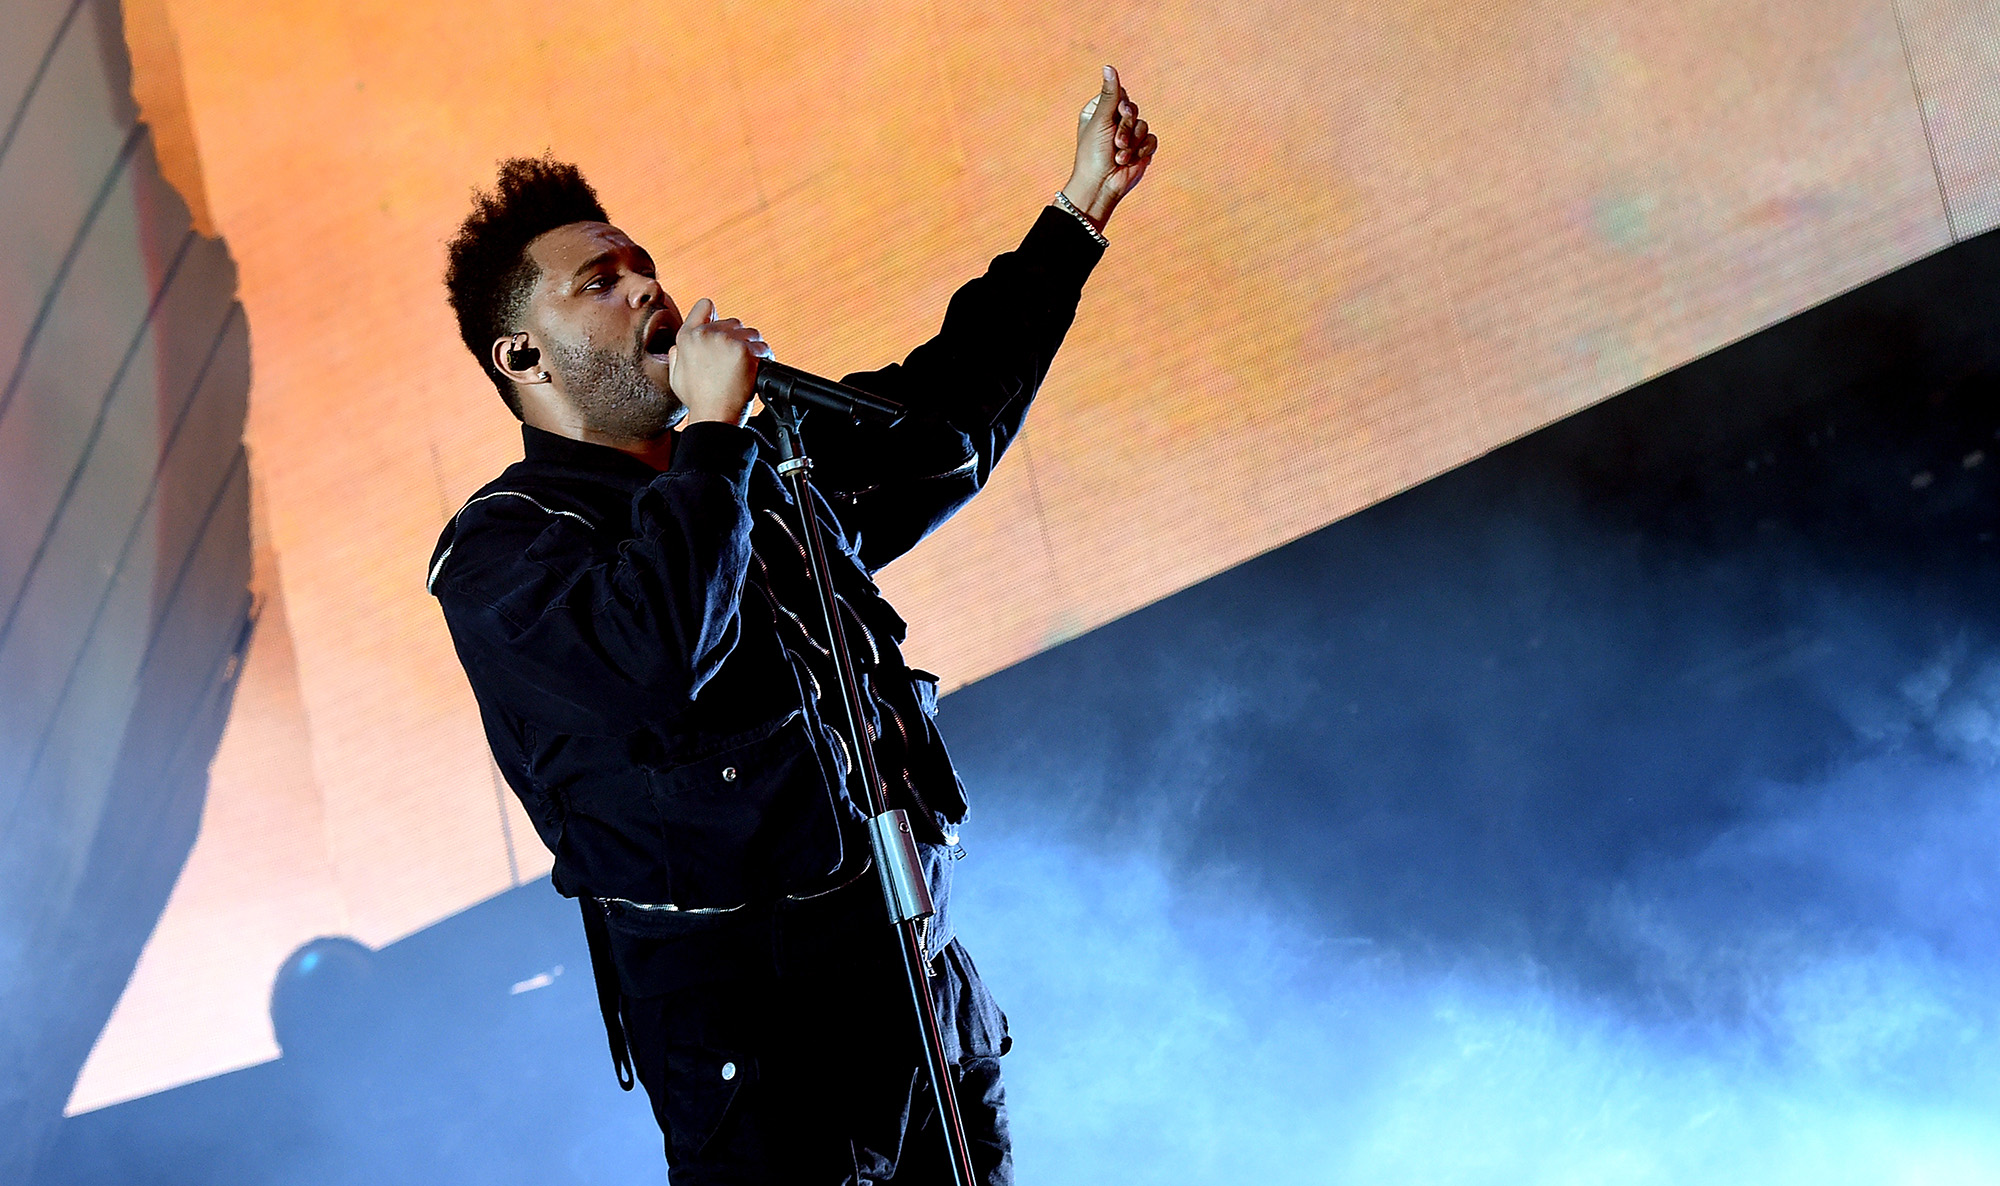 The Weeknd to Headline Super Bowl 2021 Halftime Show - Super Bowl LV  Performers